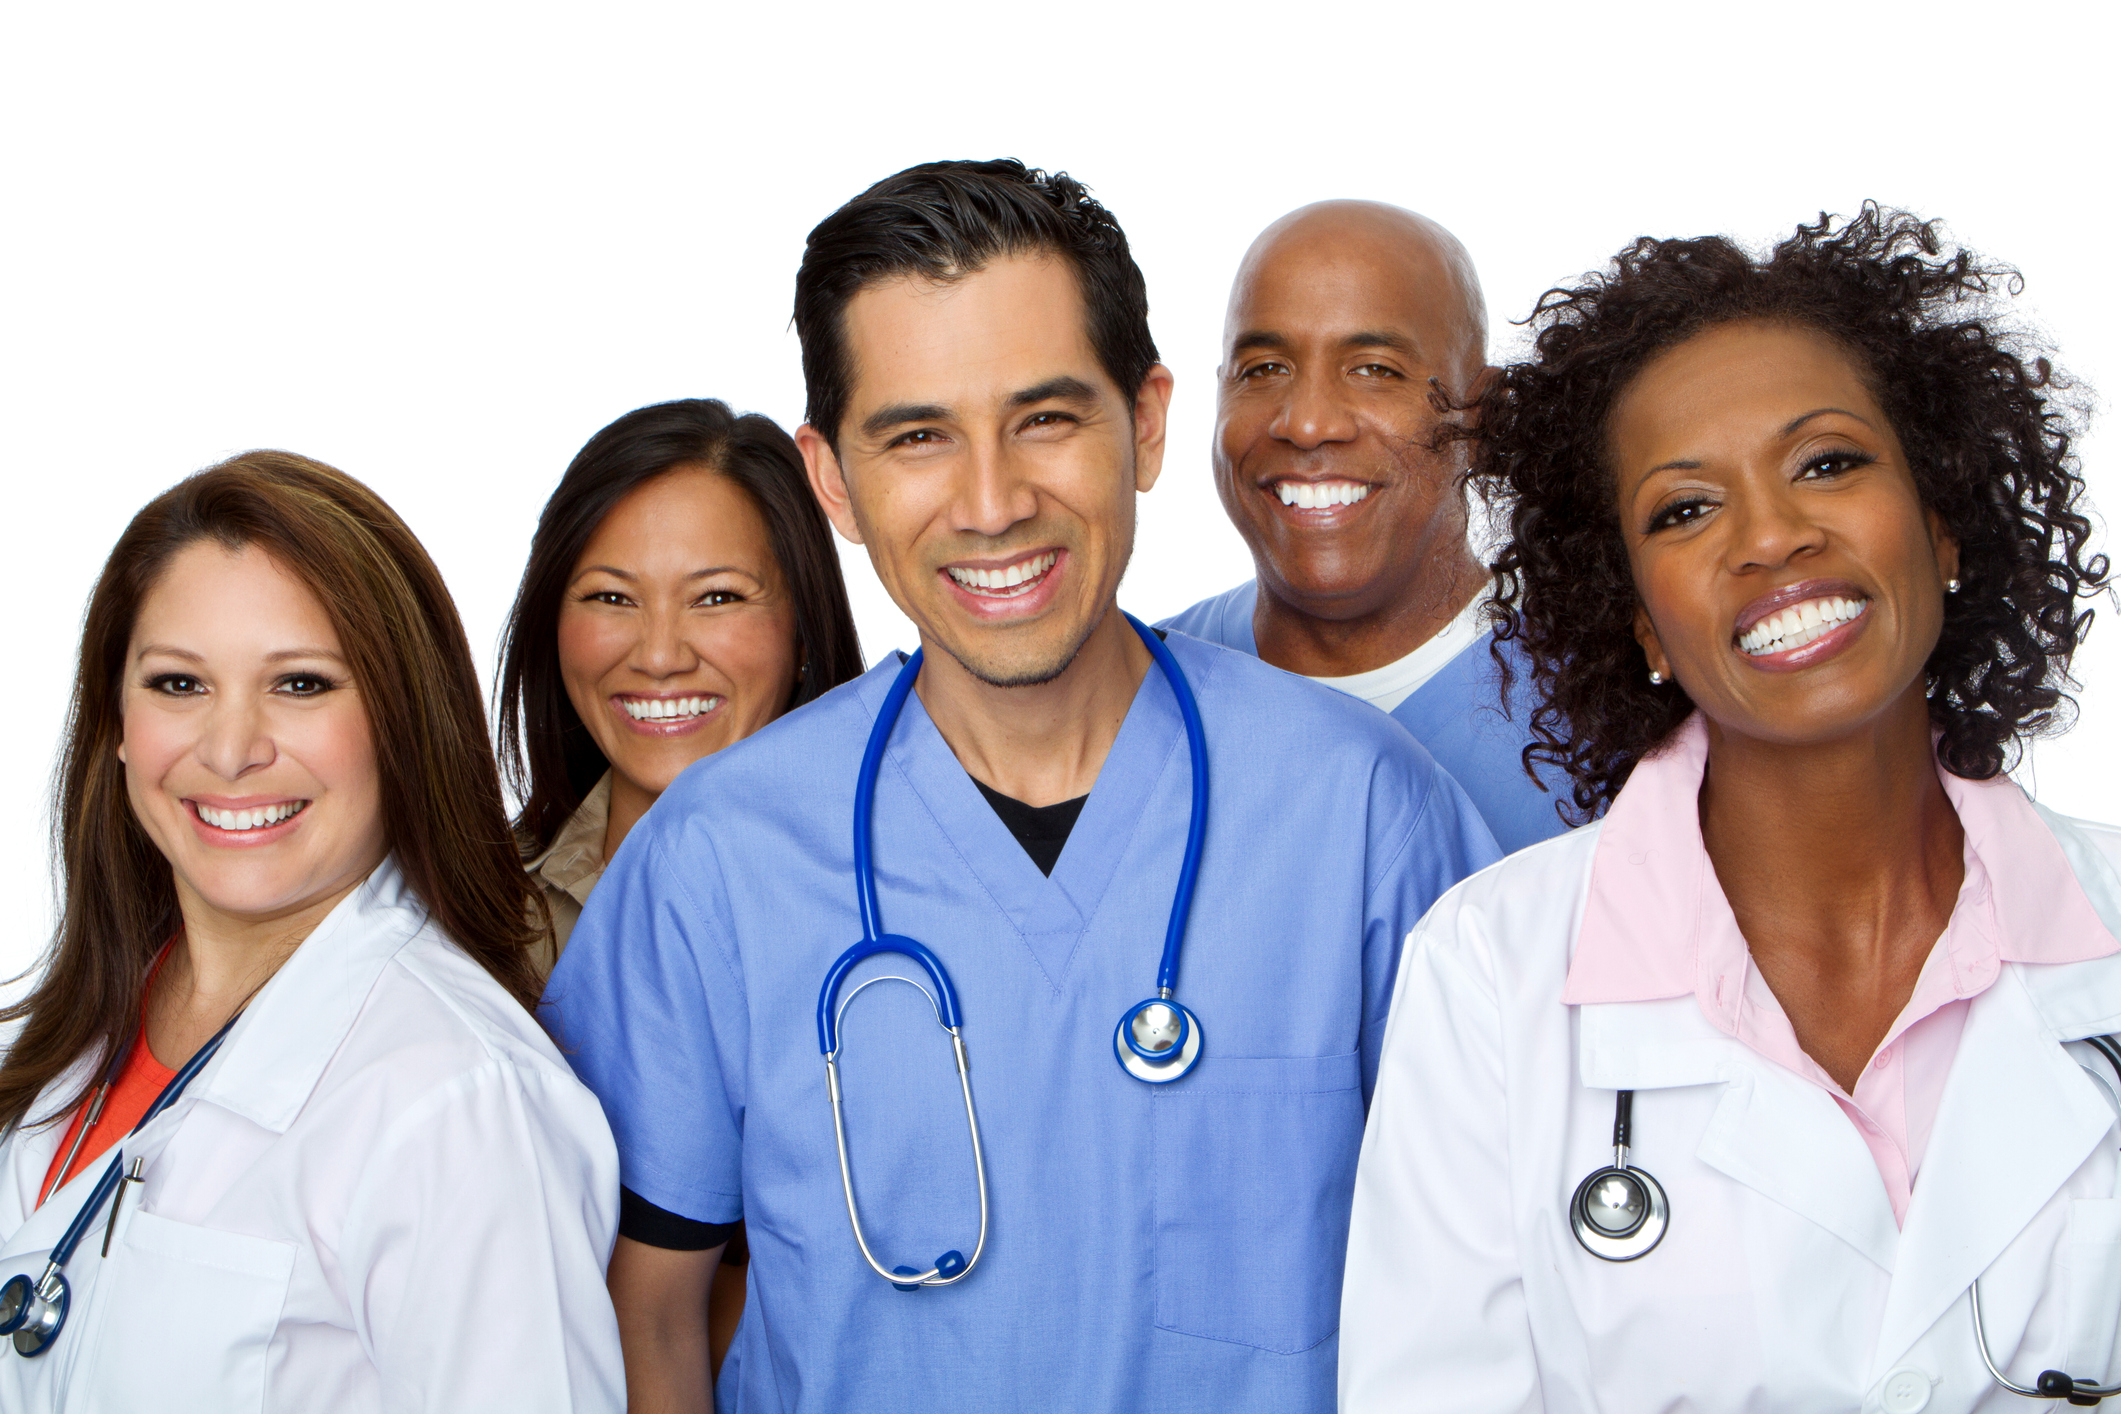 A group of healthcare professionals